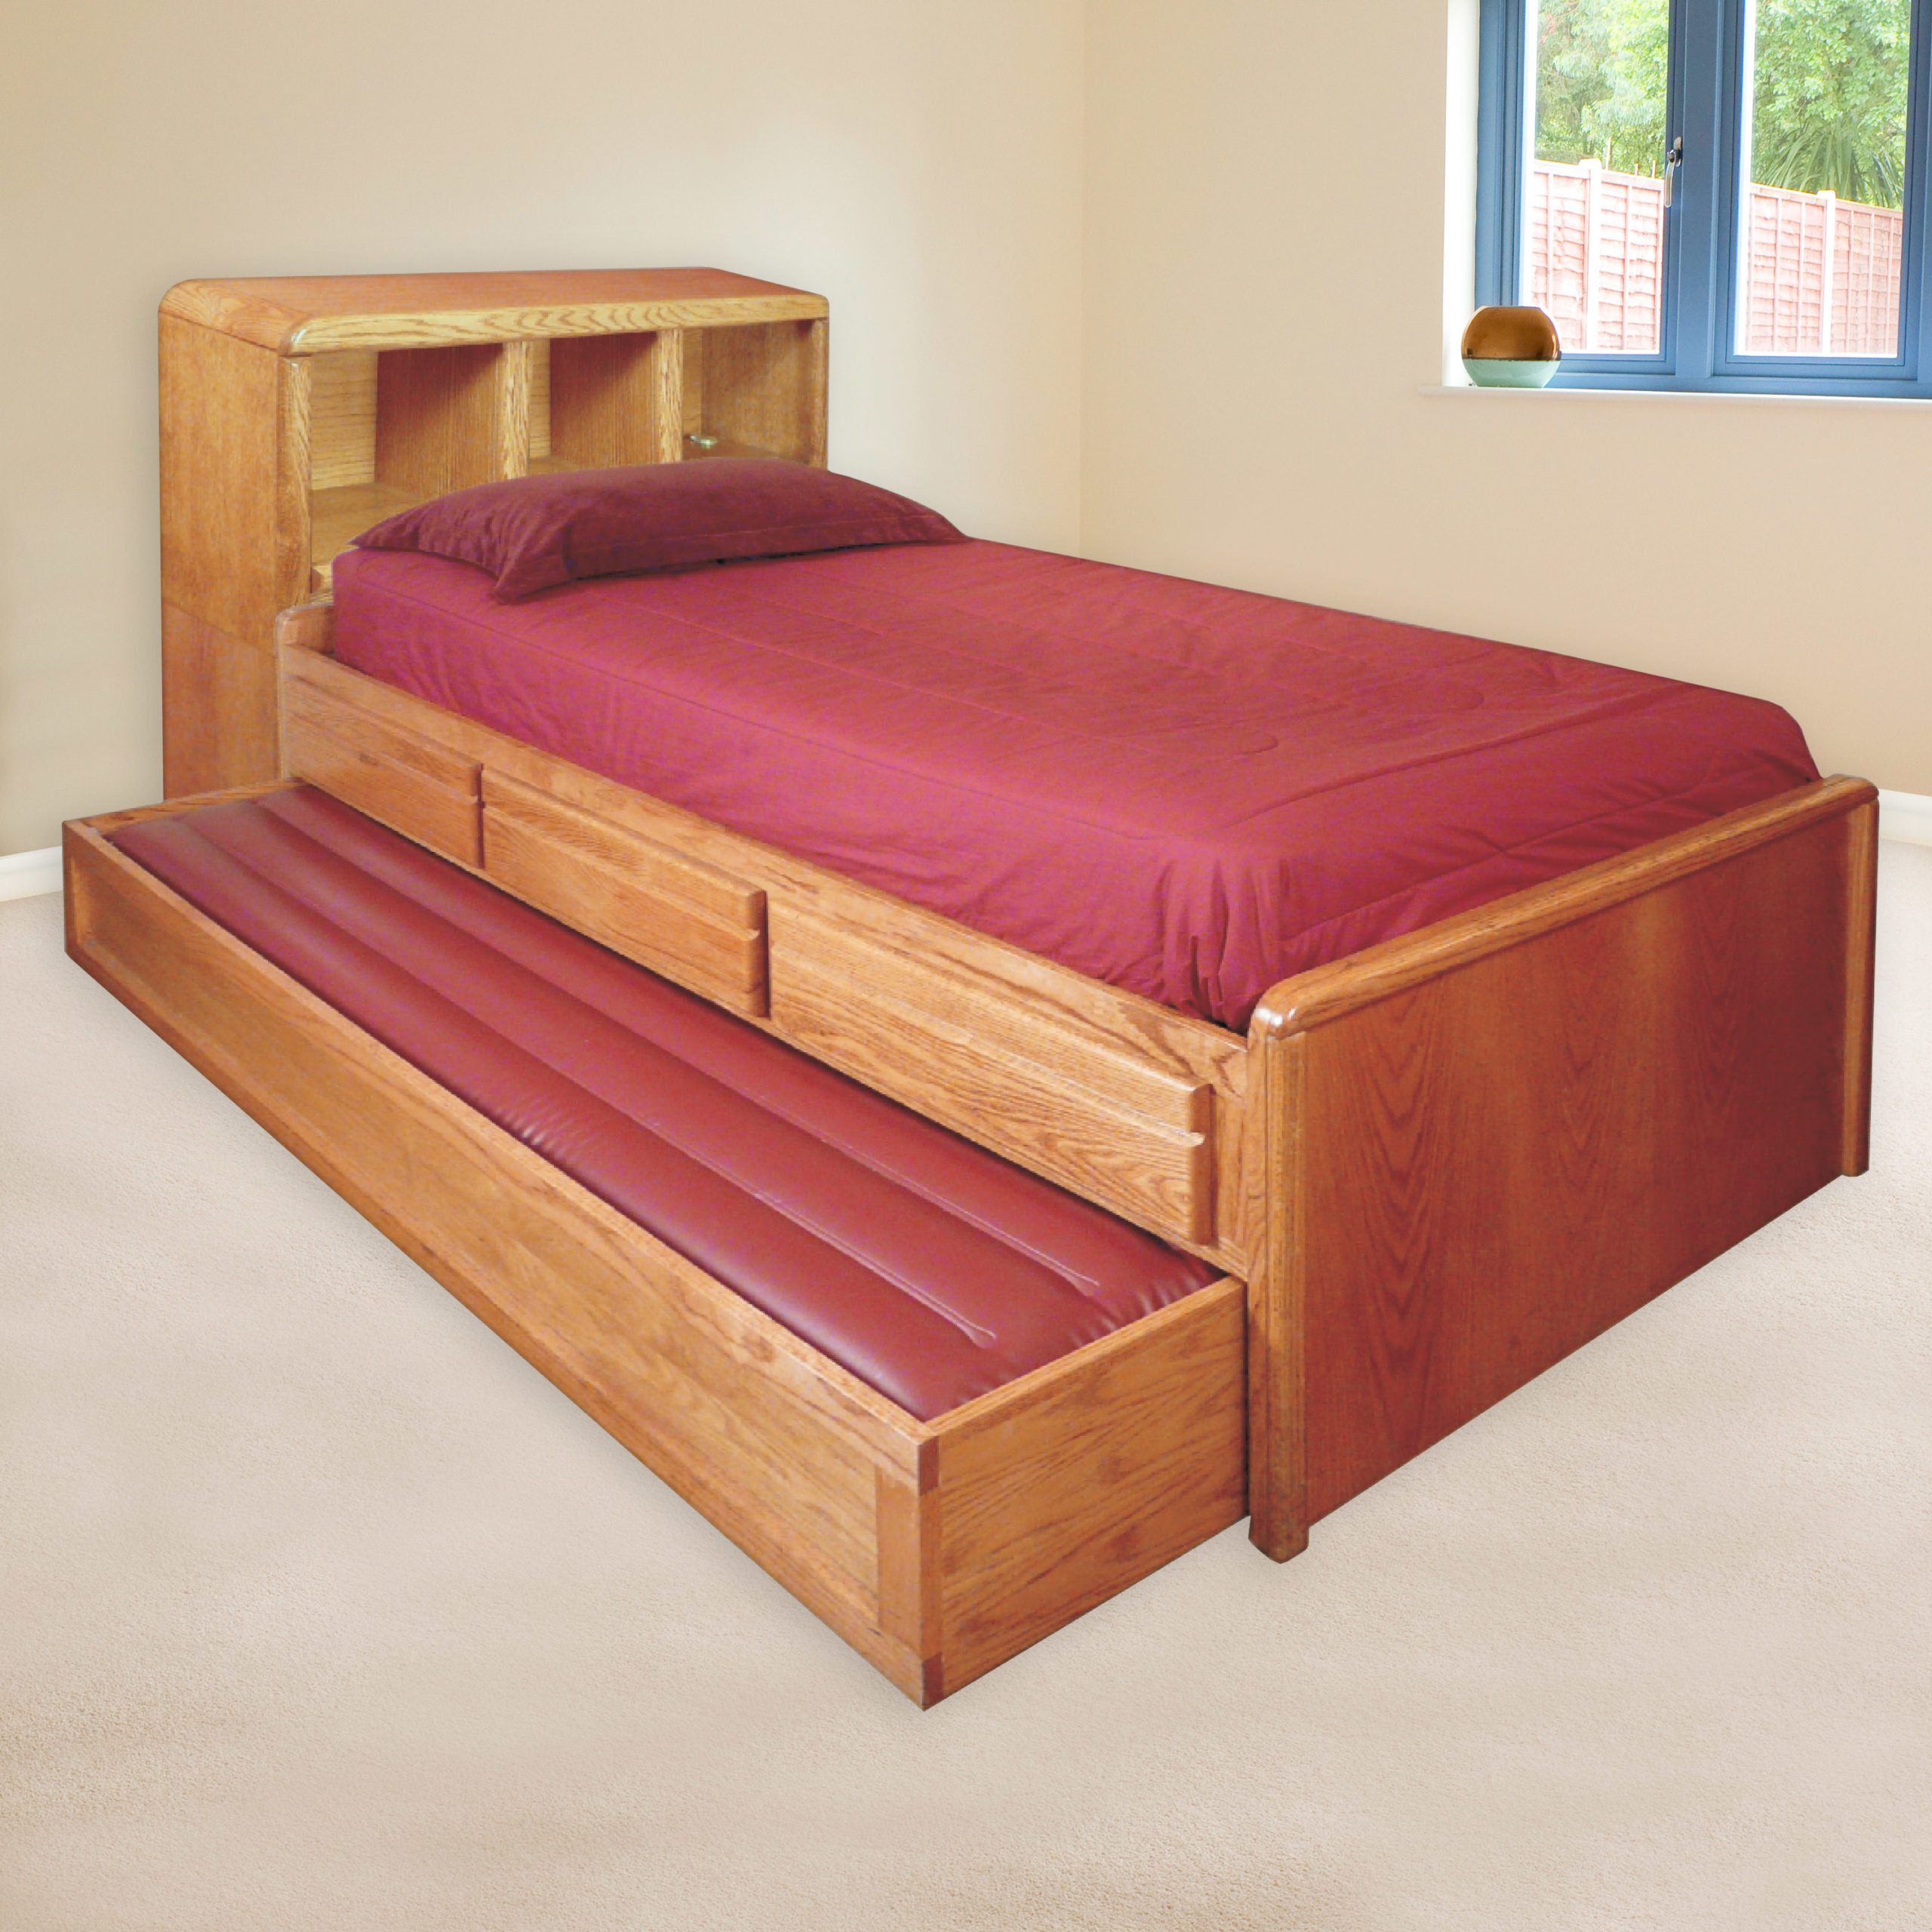 Bookcase Trundle Bed With La Jolla, Twin Trundle Bed With Bookcase Headboard